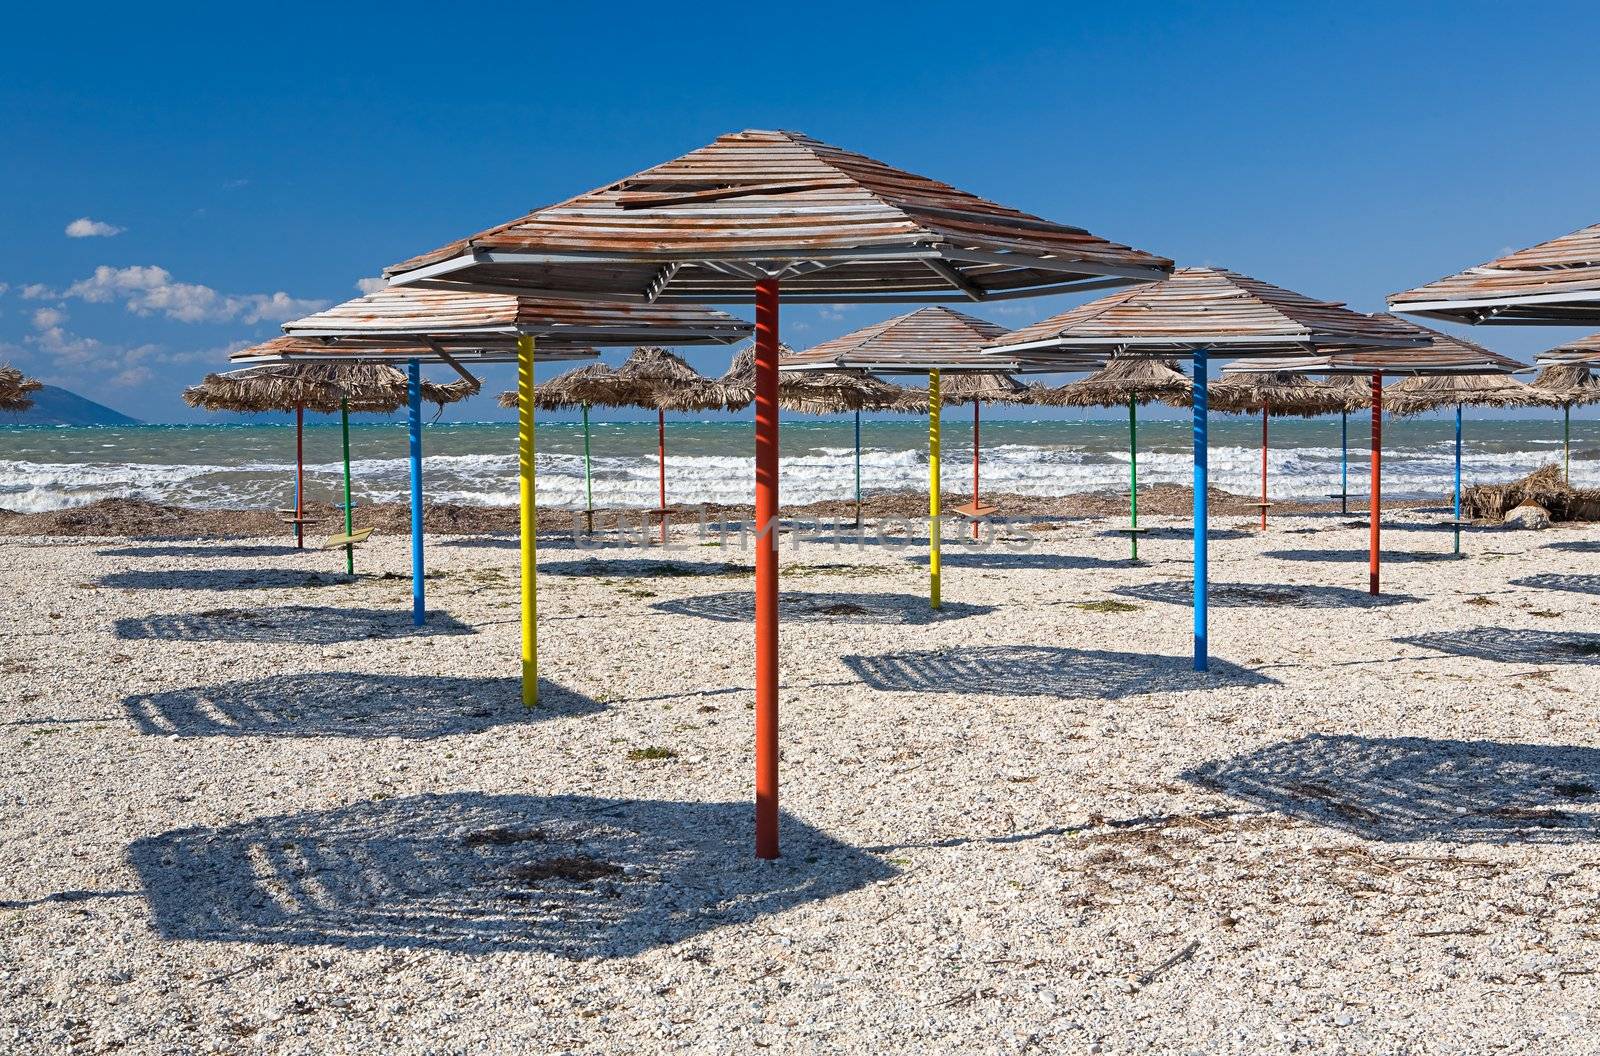 Set of beach umbrellas on sand making shadows under the blue clear sky in hot day
